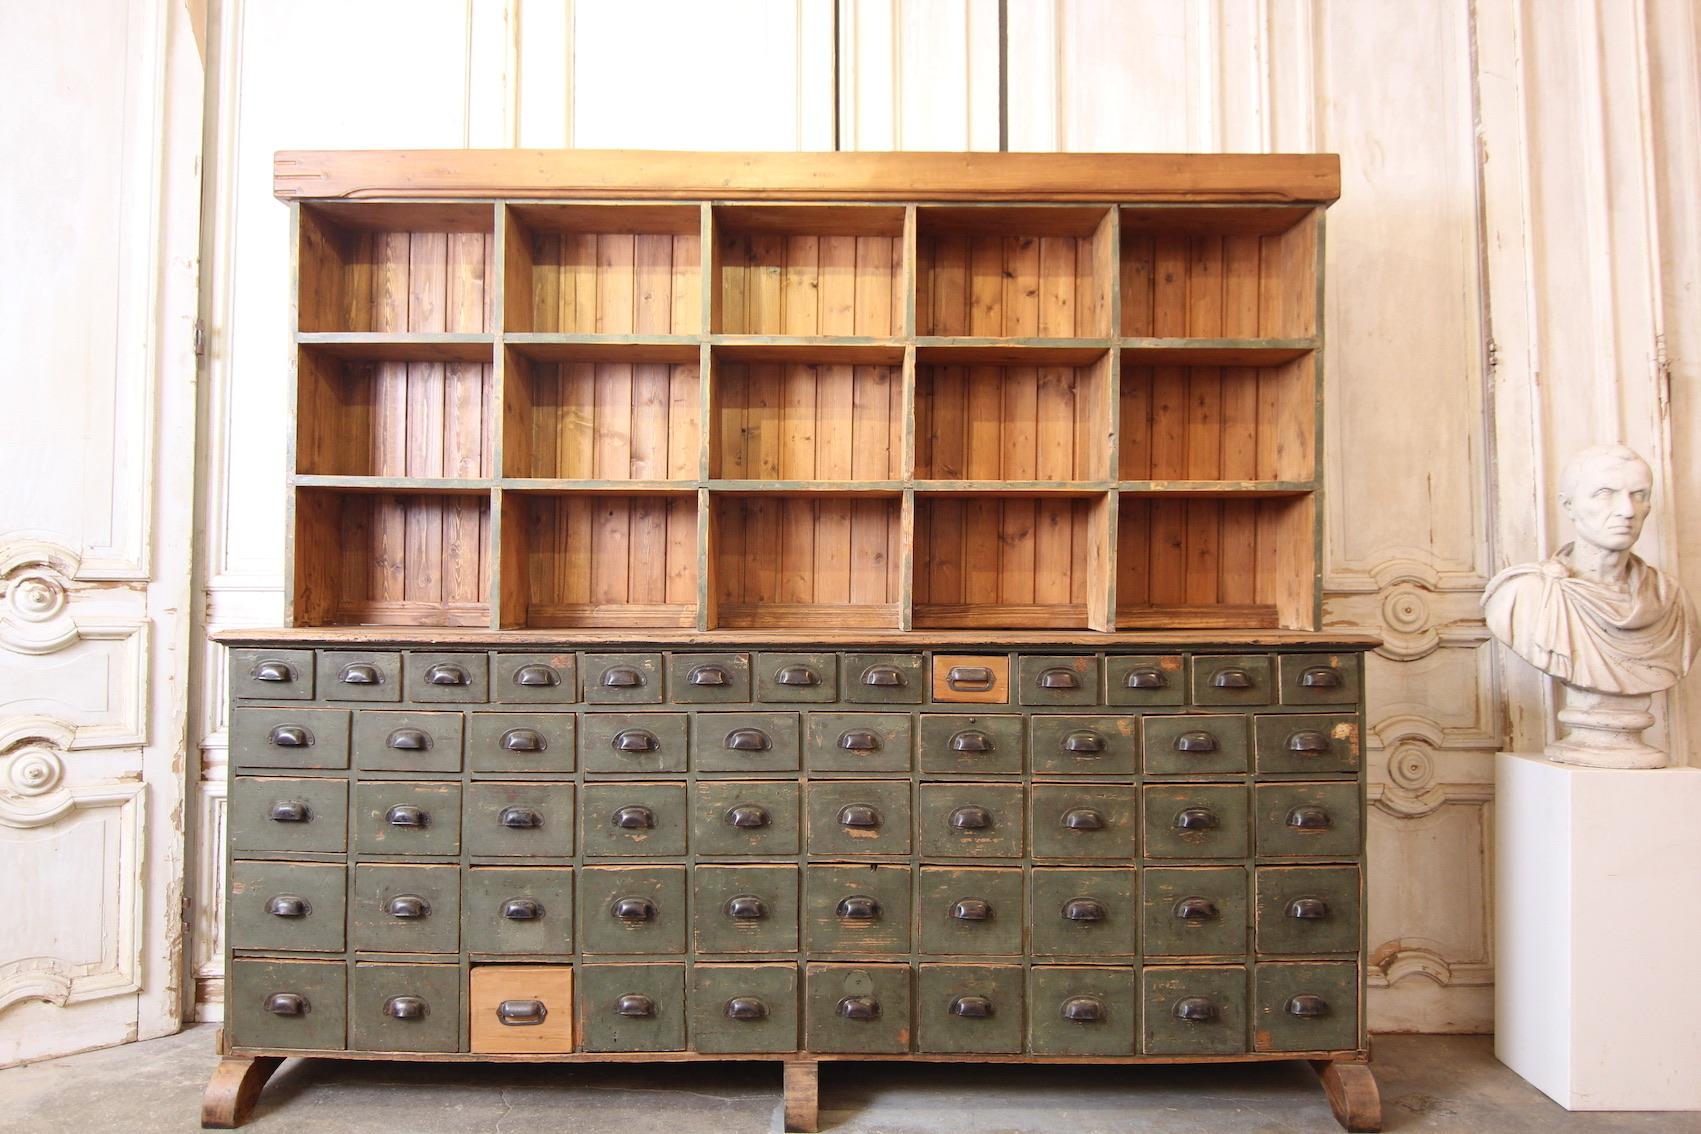 Original drawer cabinet from an early 20th century colonial goods shop. Solidly made of pine wood. 

2-part, consisting of a drawer cabinet with a total of 53 drawers and the shelf attachment.

Dimensions: 
97 cm/ 201 cm high, 235 cm wide, 46